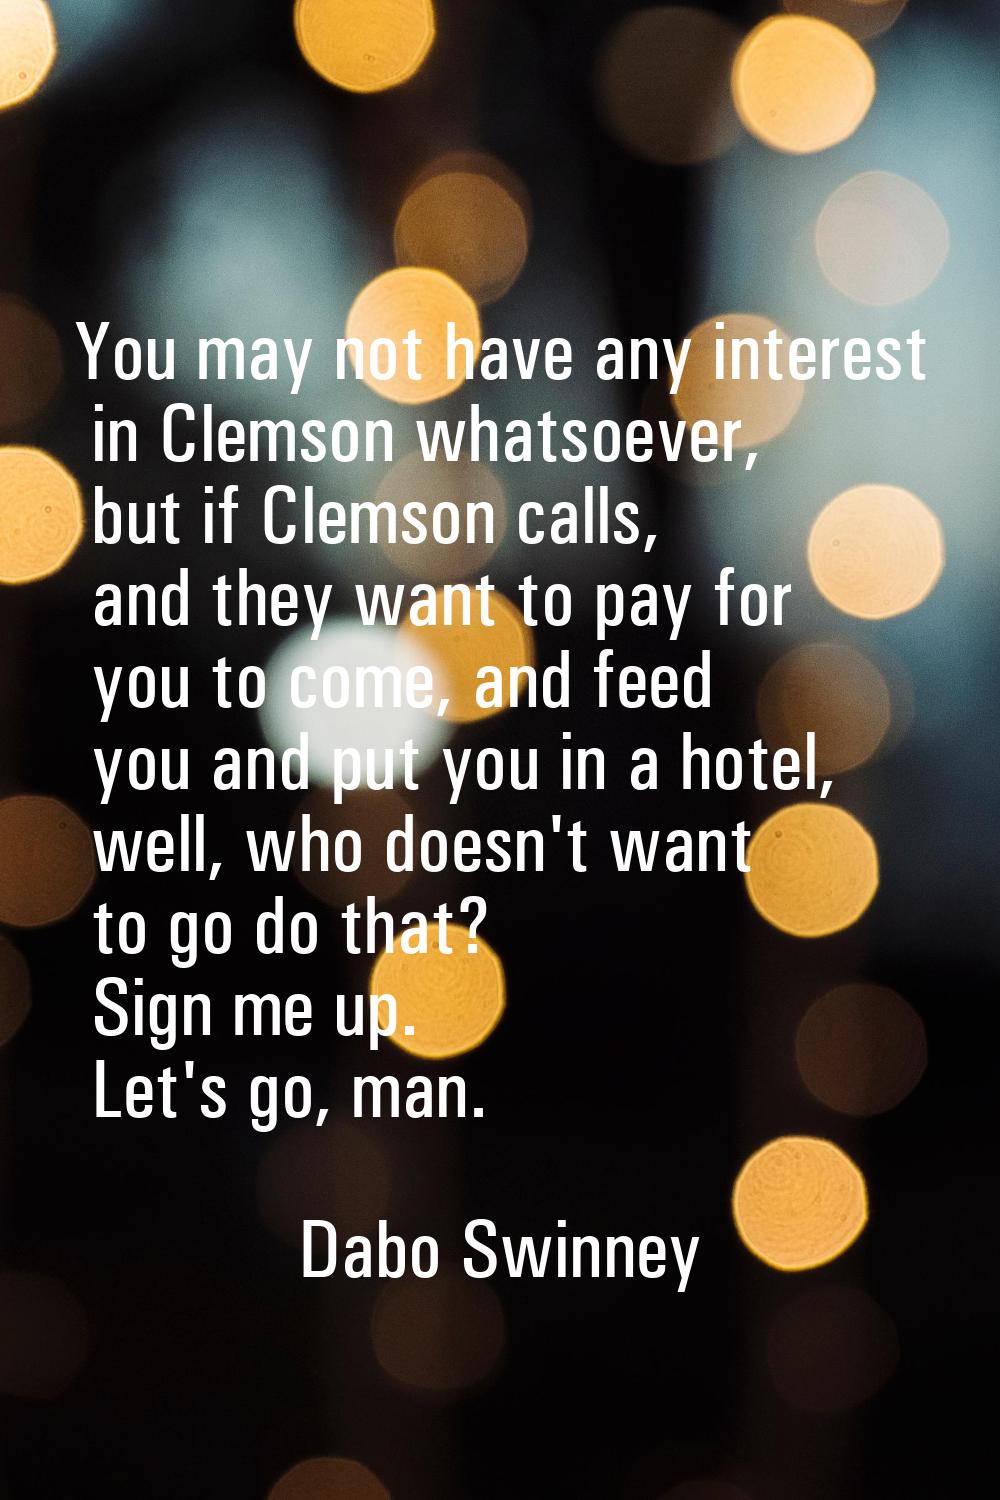 You may not have any interest in Clemson whatsoever, but if Clemson calls, and they want to pay for